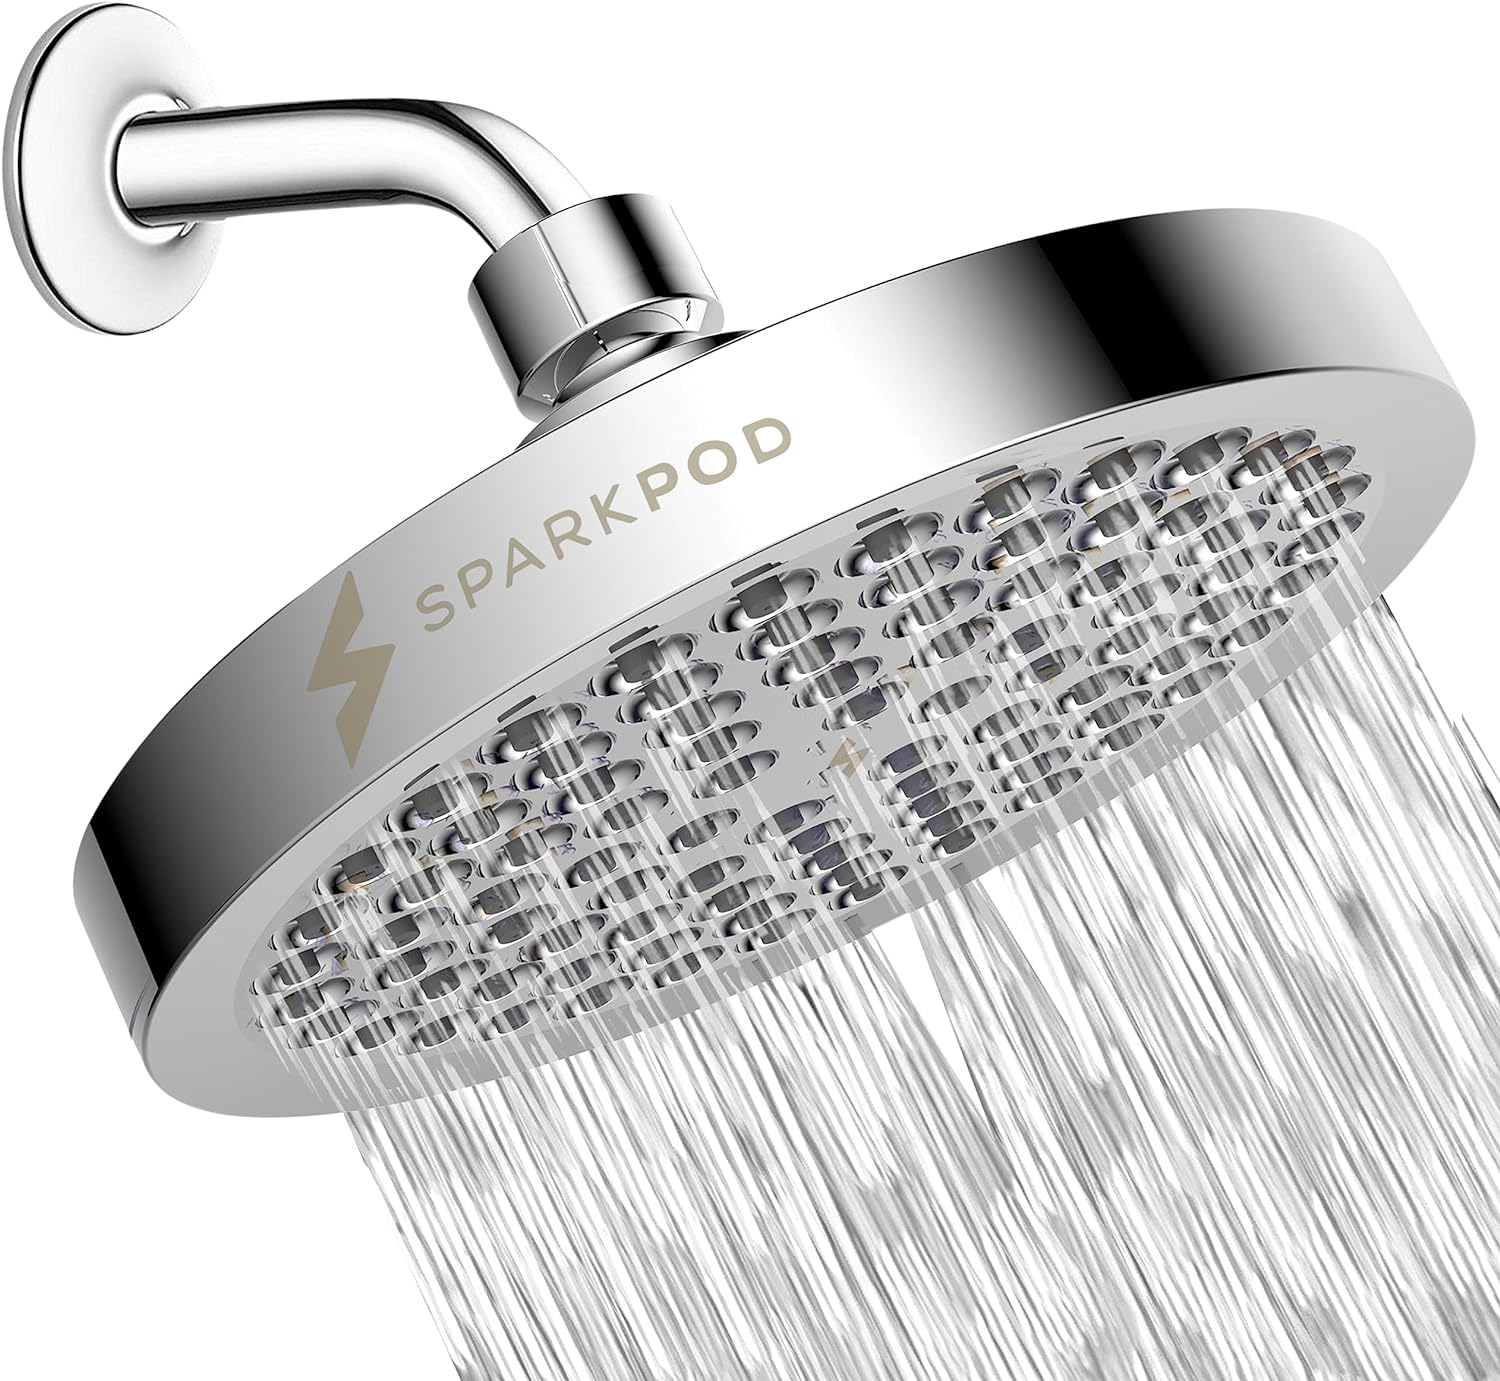 I purchased this a little over a year ago and initially just purchased the shower head. Great shower head, easy install, and great water distribution and pressure.However, I went back and ordered the extension recently because I didnt like this shower head being angled in our shower for a few reasons:1: we have a bench at the back of our shower and being angled water was always left sitting on the bench, the extension keeps the shower head flat pointed down and keeps water off the bench2: my hu